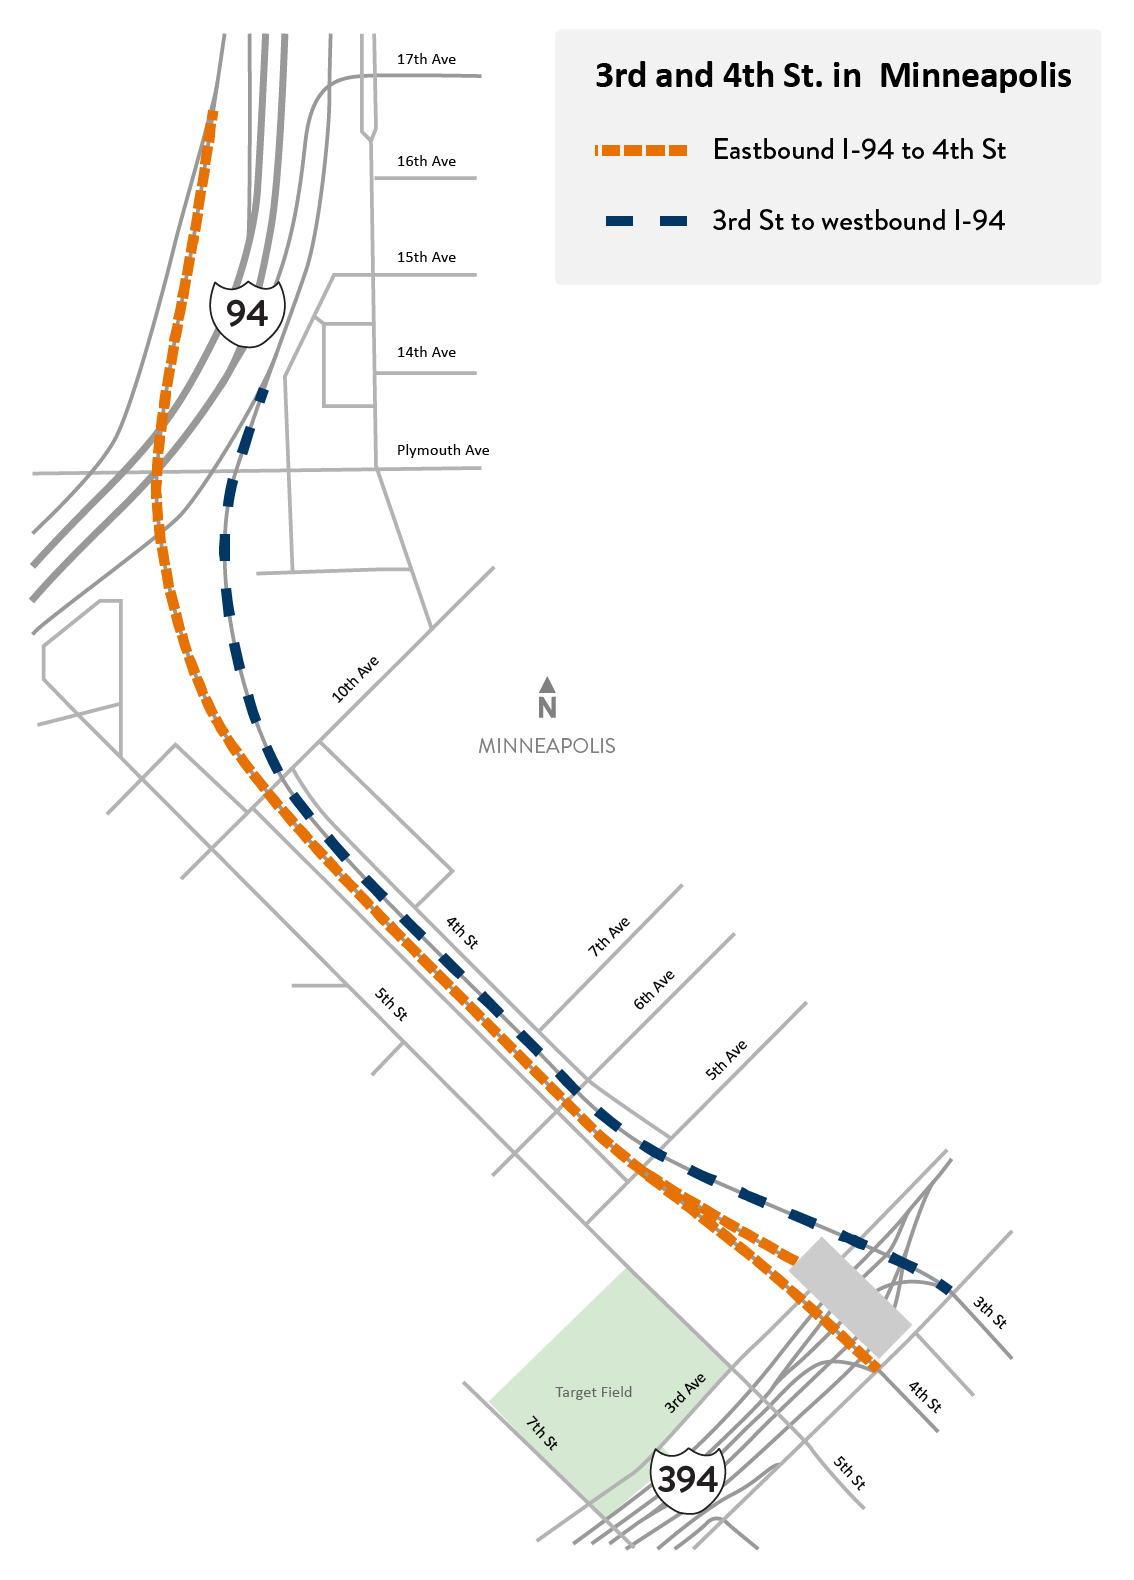 Eastbound I-94 to 4th Street ramp and 3rd Street to westbound I-94 ramp in Minneapolis project area map.